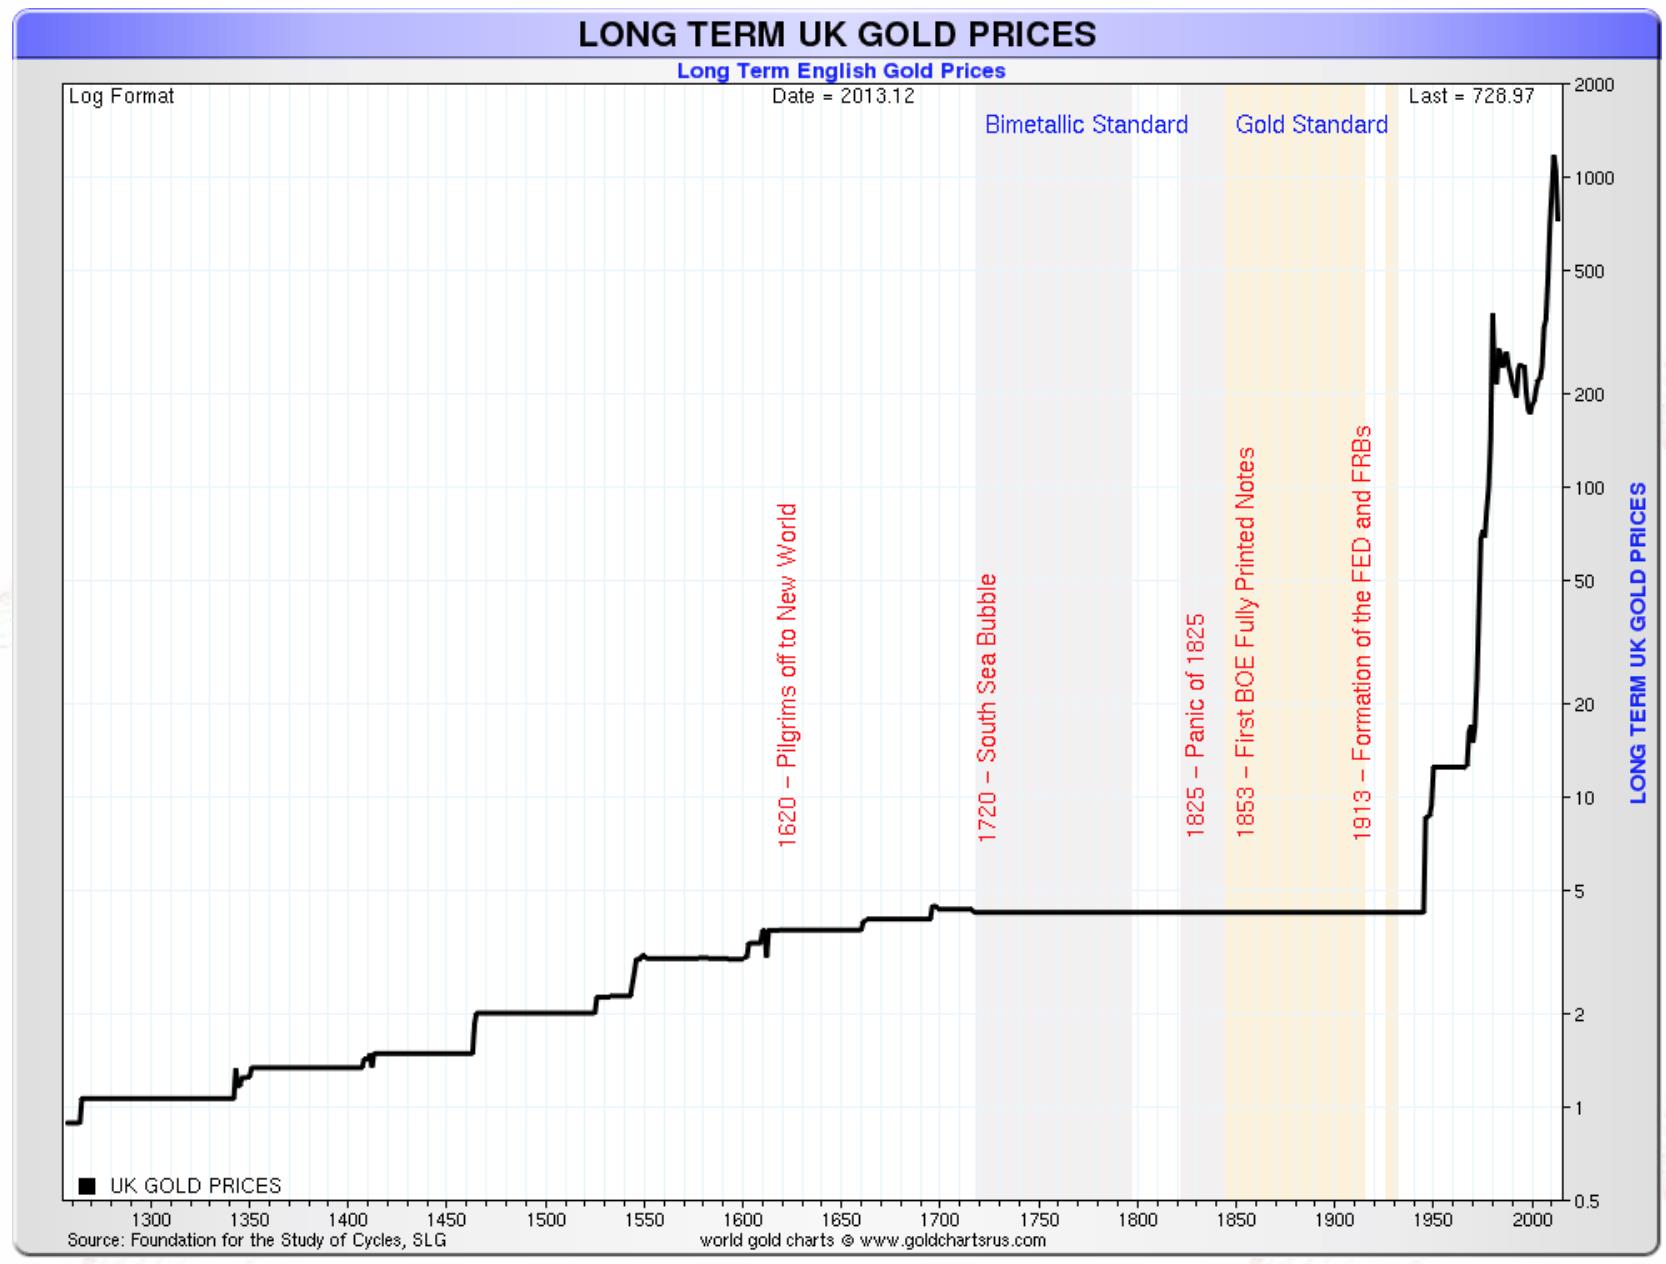 Long Term UK Gold Prices